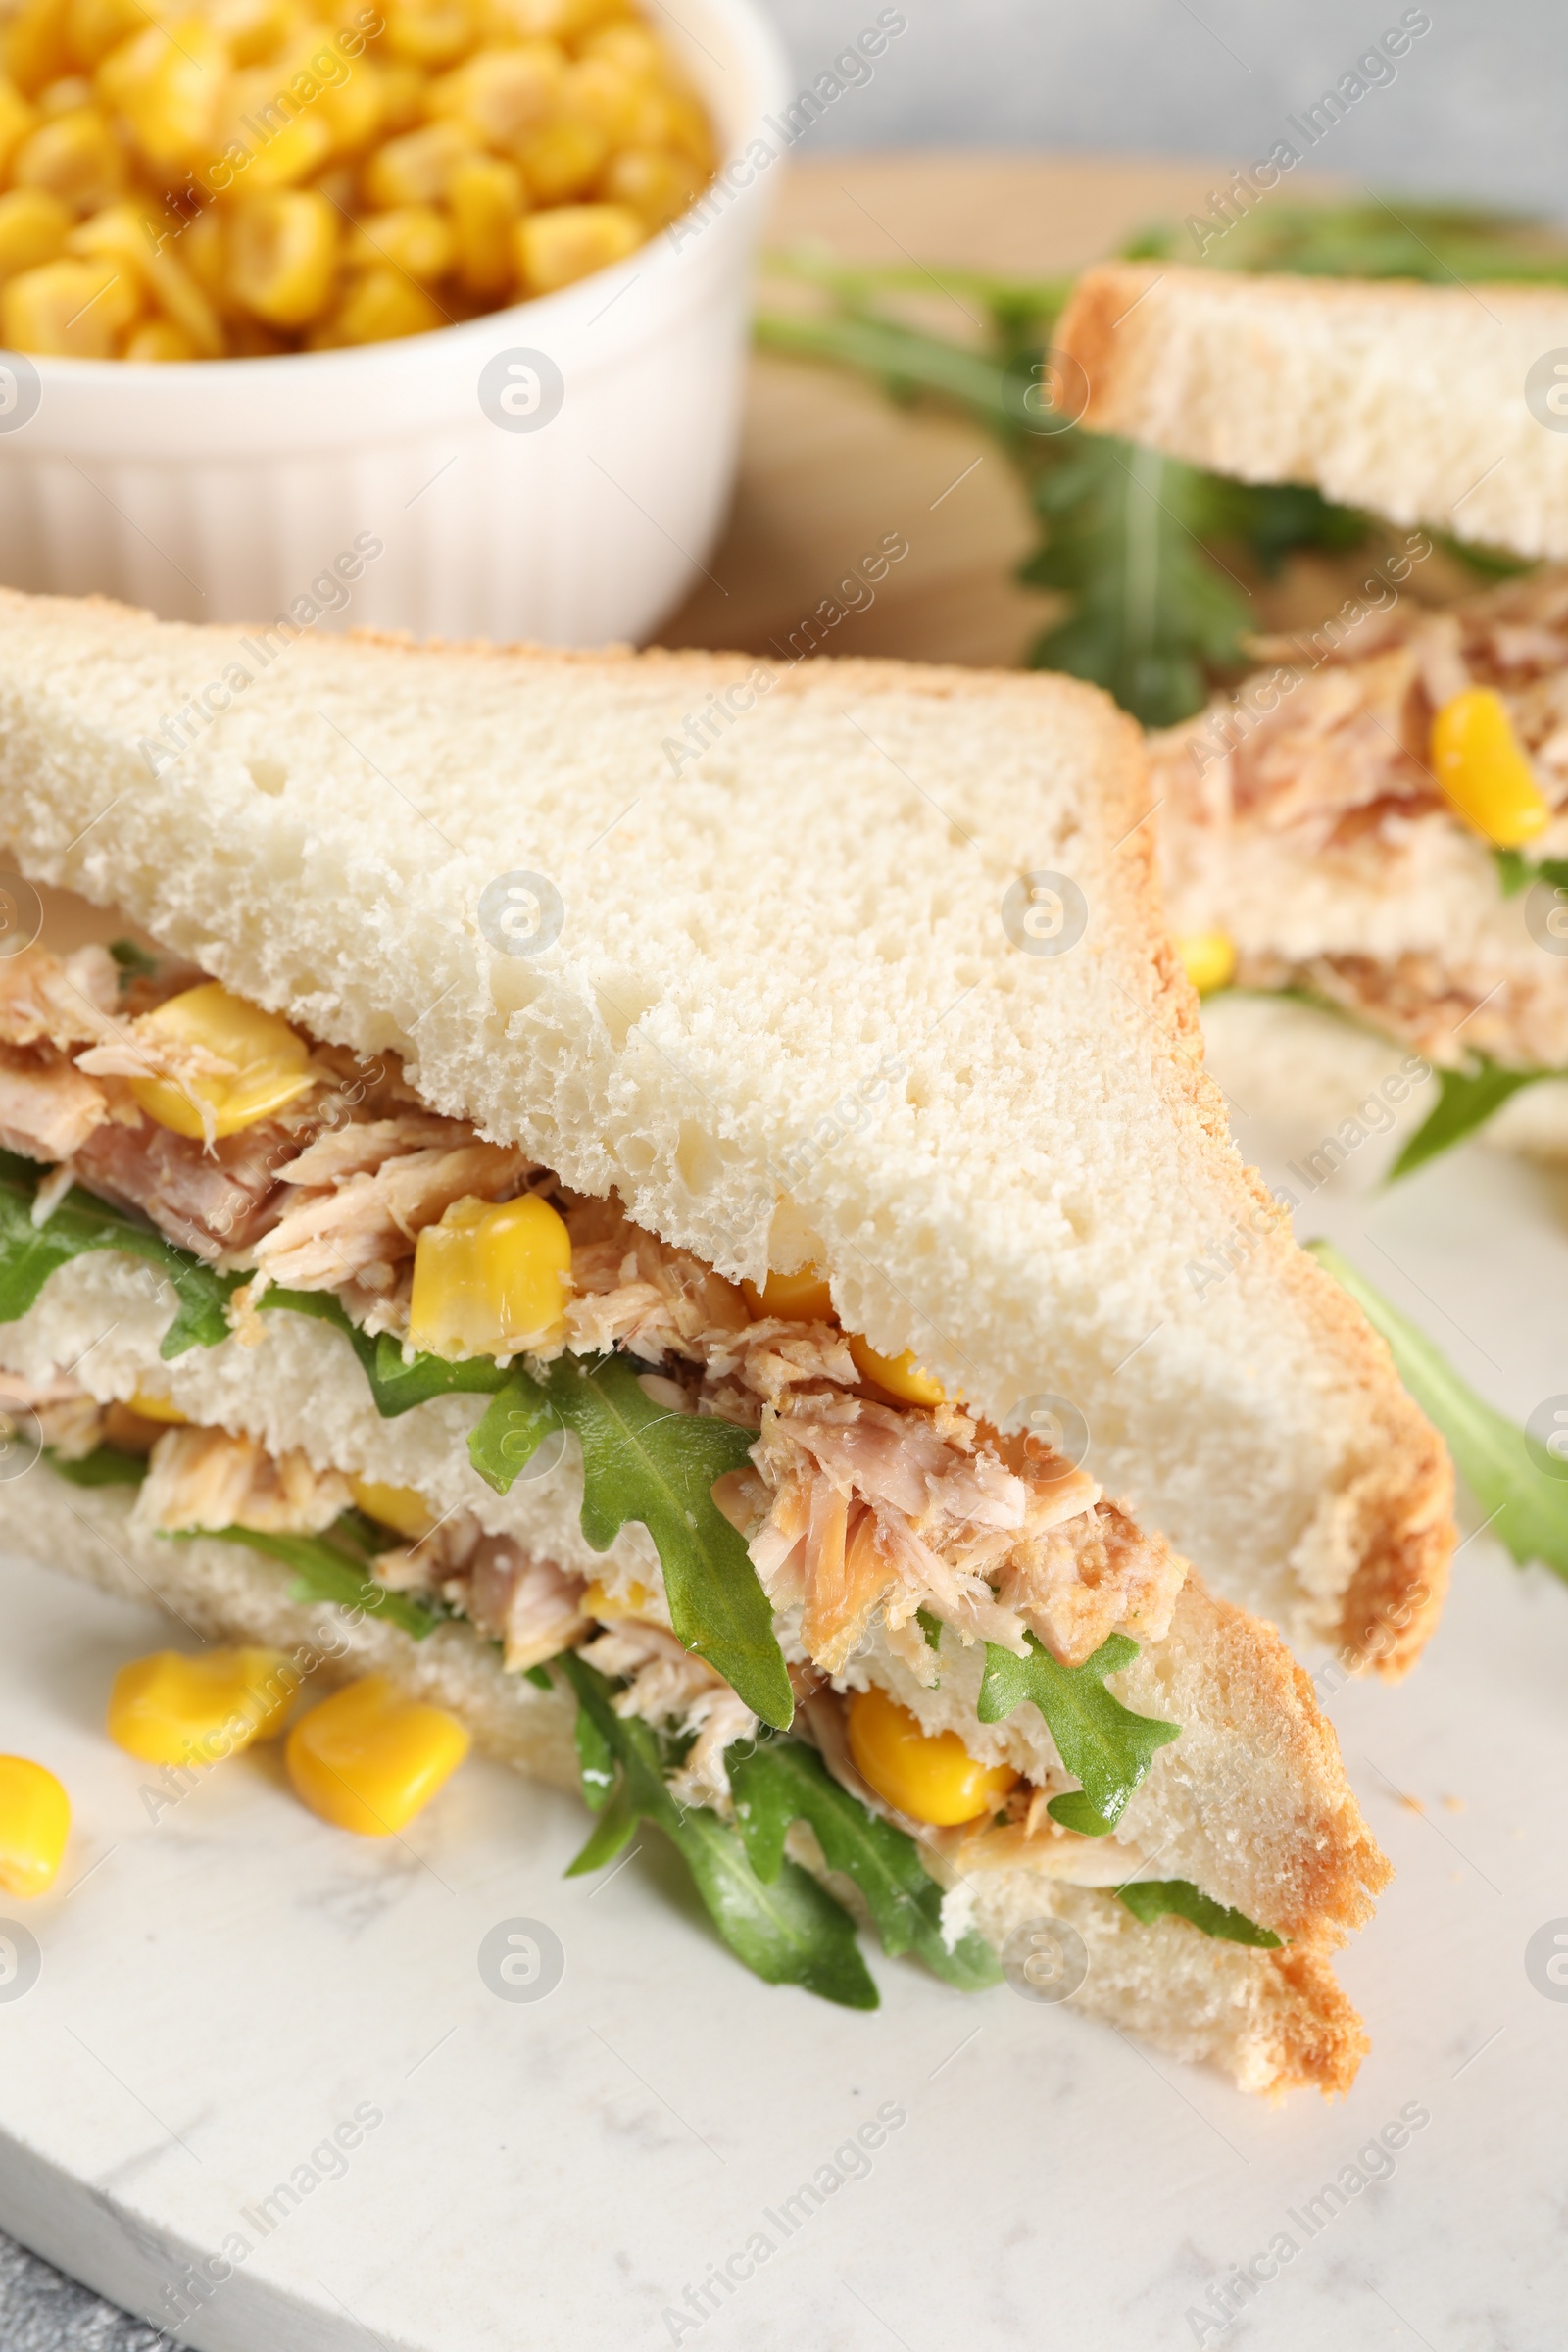 Photo of Delicious sandwiches with tuna, corn and greens on serving board, closeup